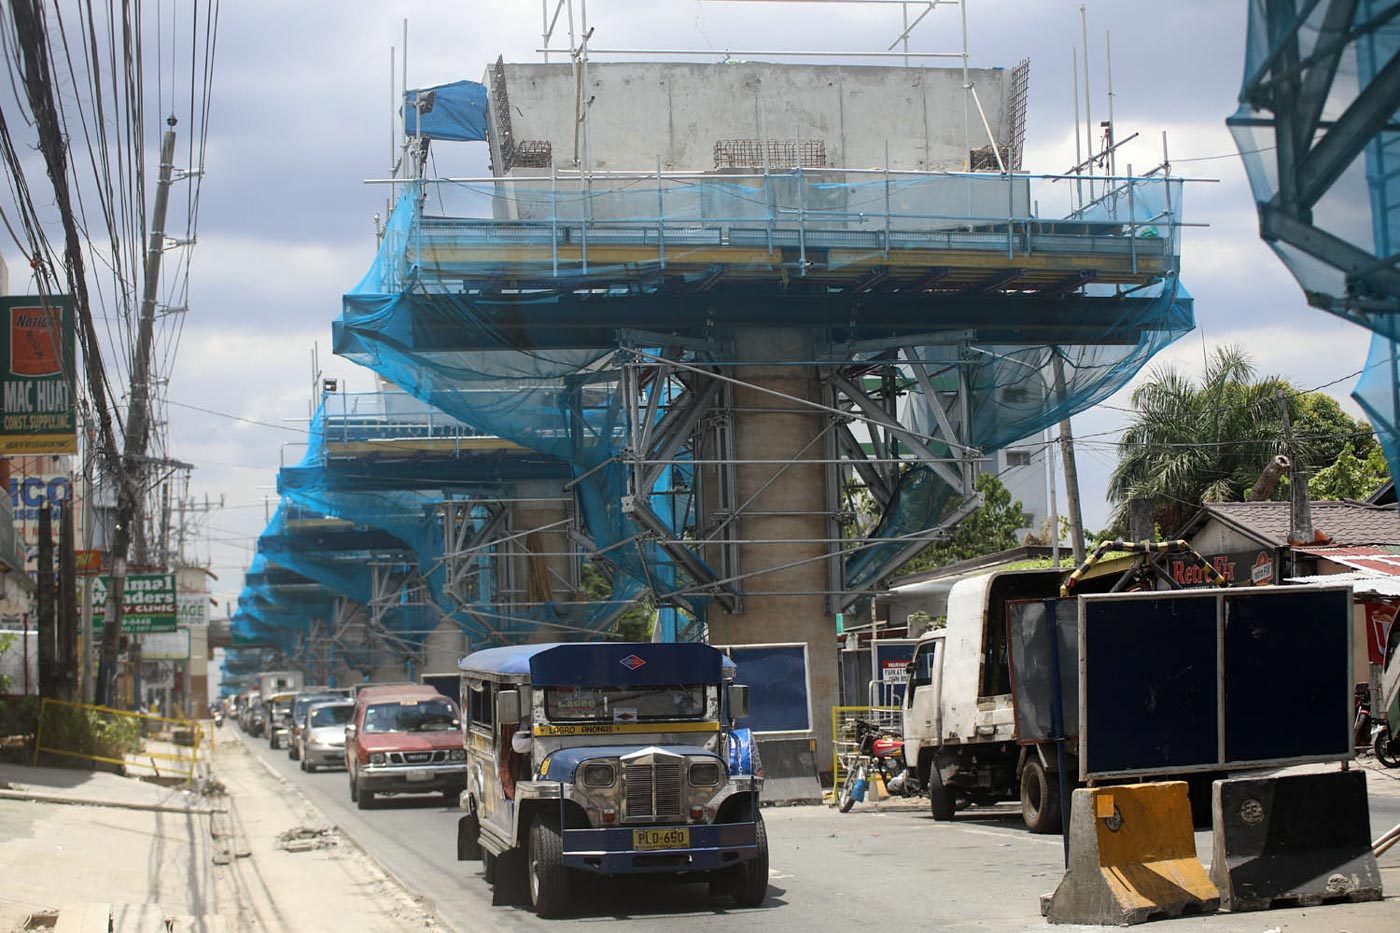 Right-of-way issues may delay MRT7 completion